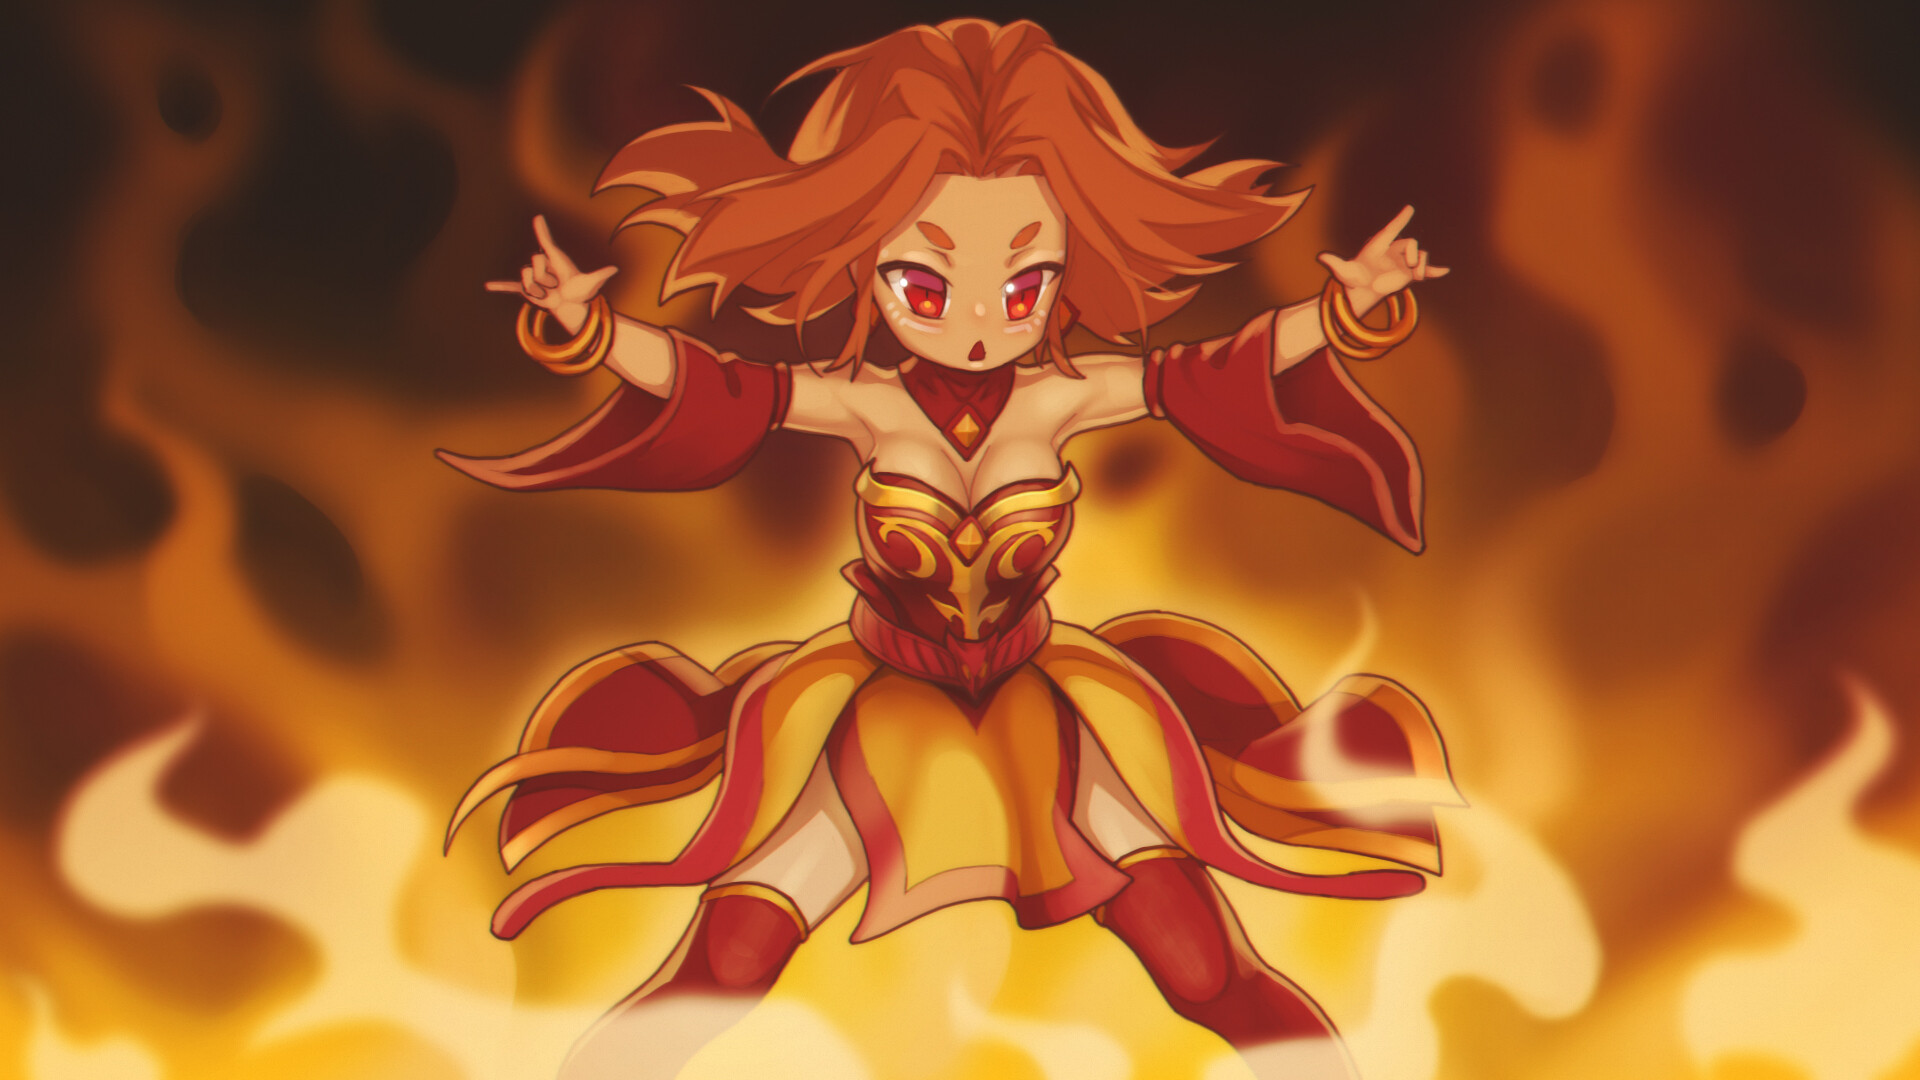 10+ Lina (DotA 2) HD Wallpapers and Backgrounds